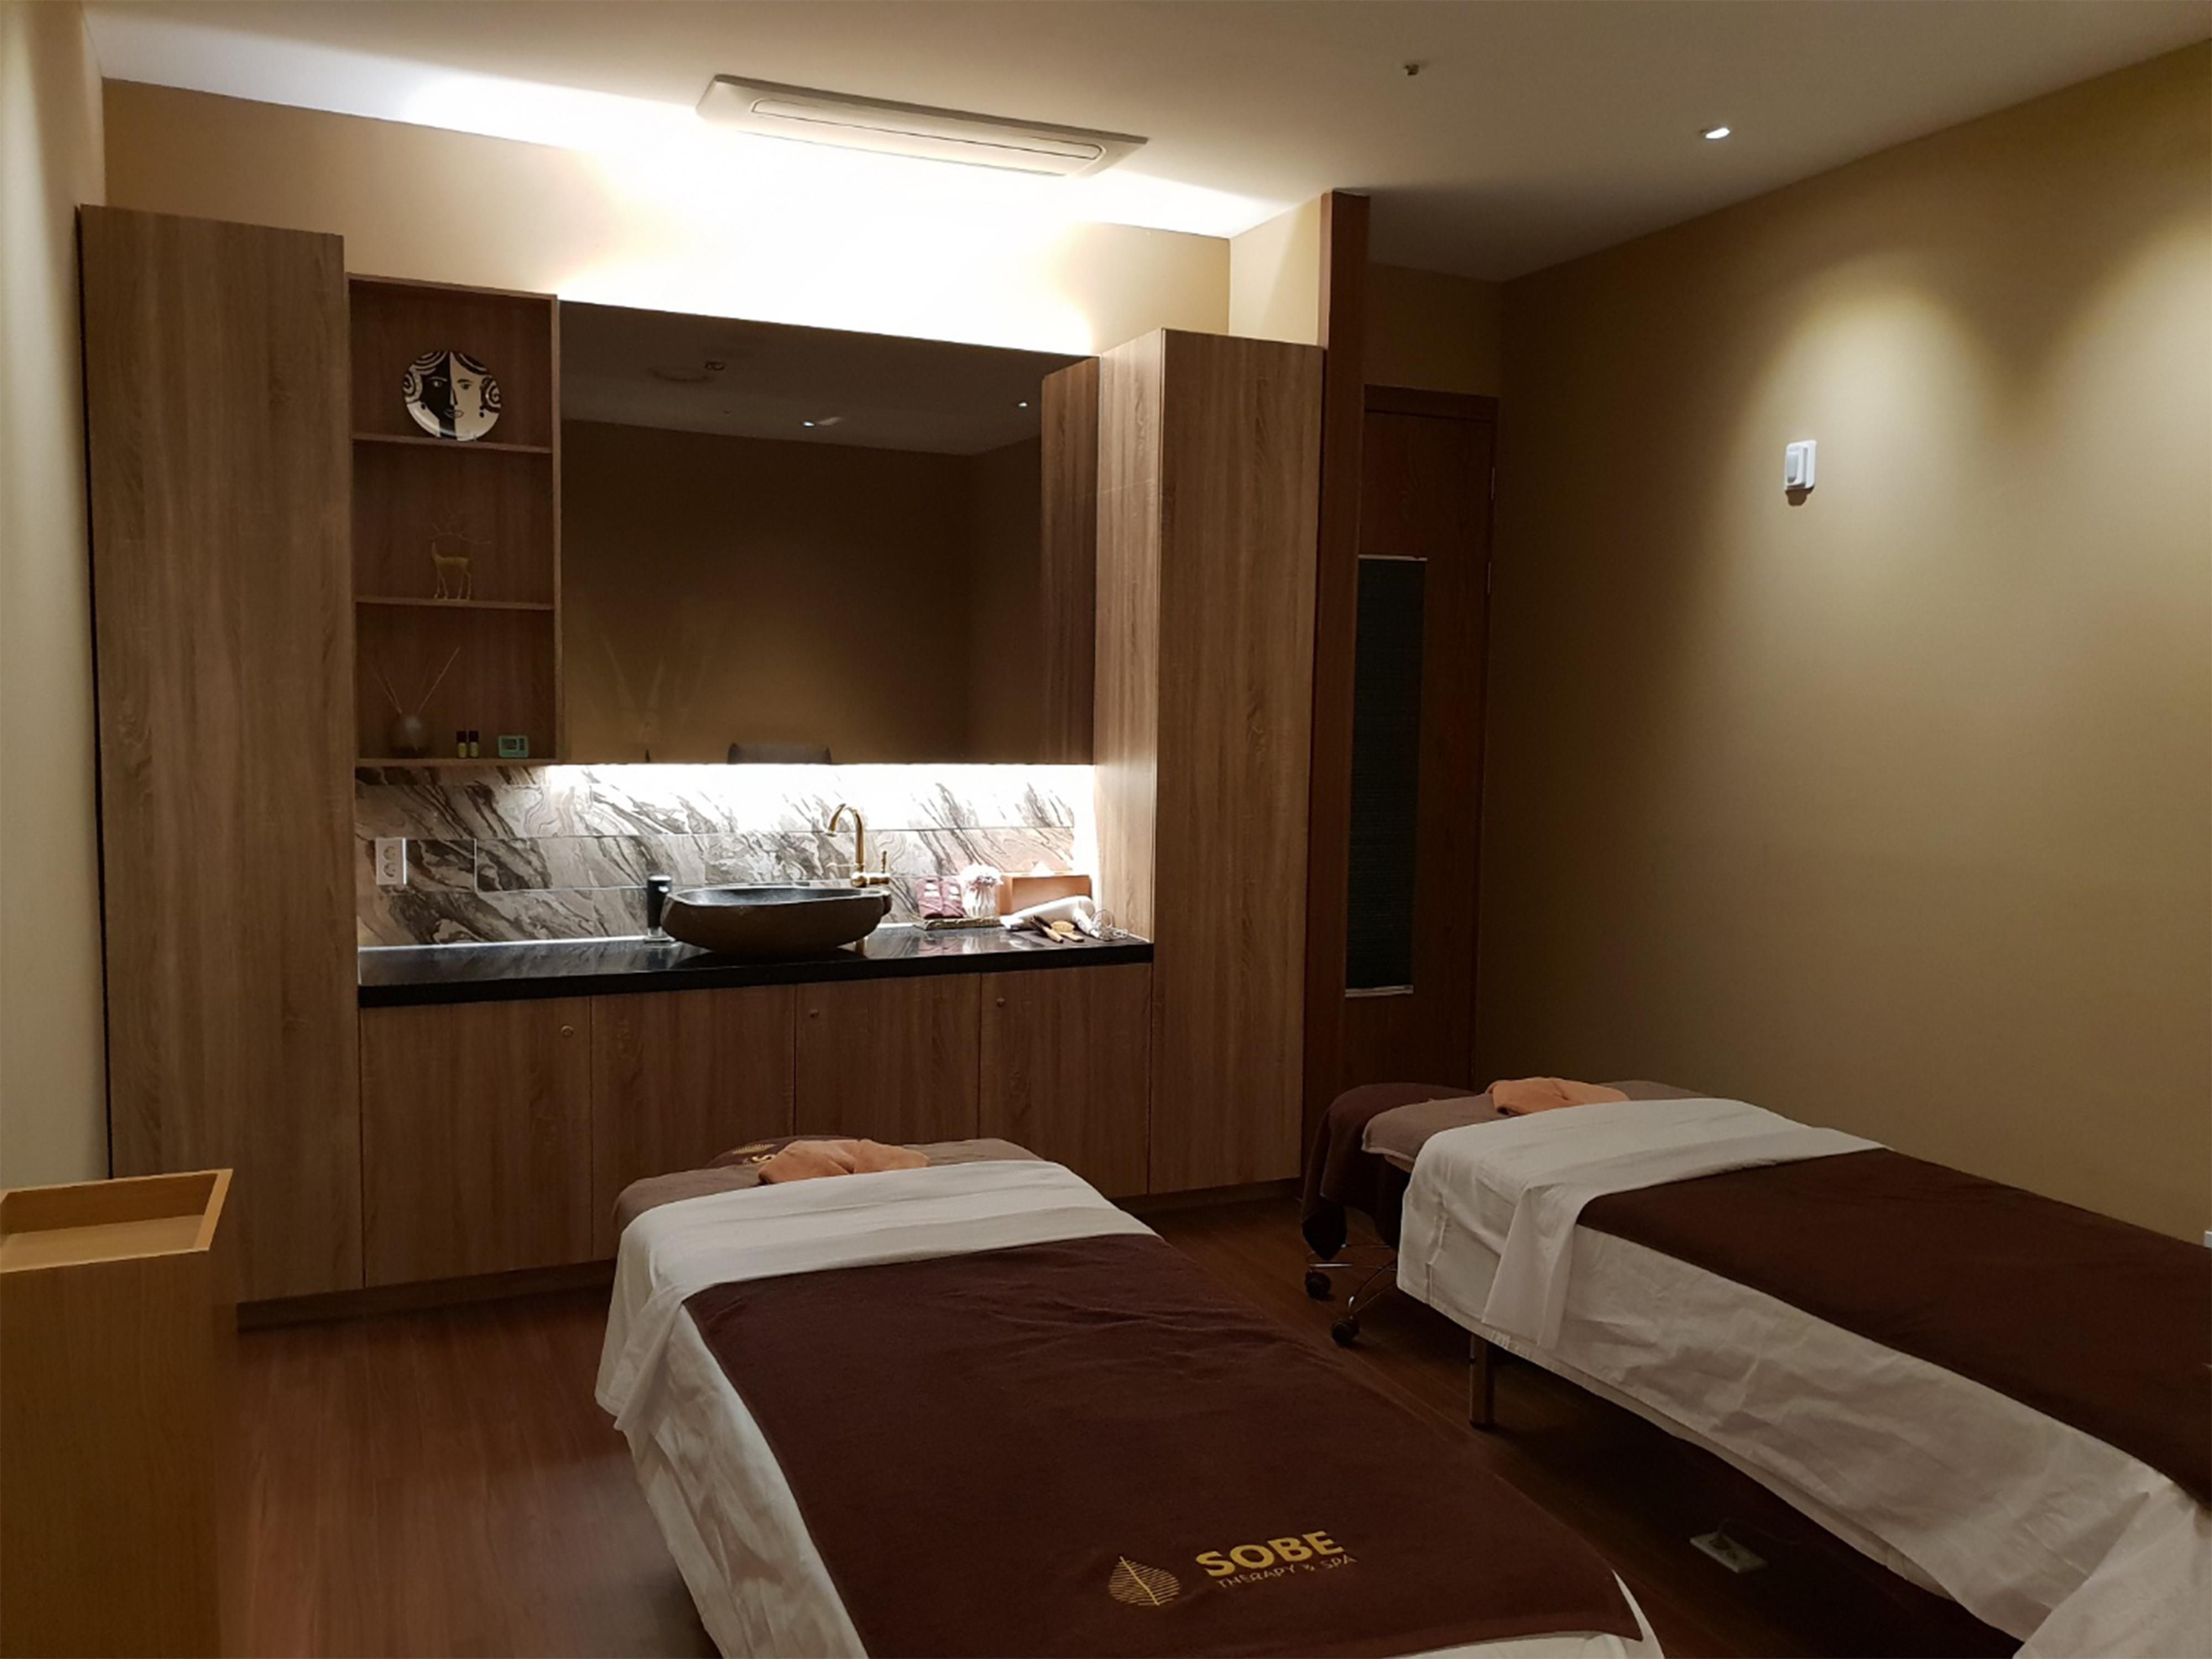 Get the luxury spa experience in Gwangju. The first luxurious spa of southwestern Korea, SPA SOBE provides a space for an escape to a haven of tranquillity. The spa features a set of comprehensive health and beauty therapies with an overall goal of enhancing wellness.